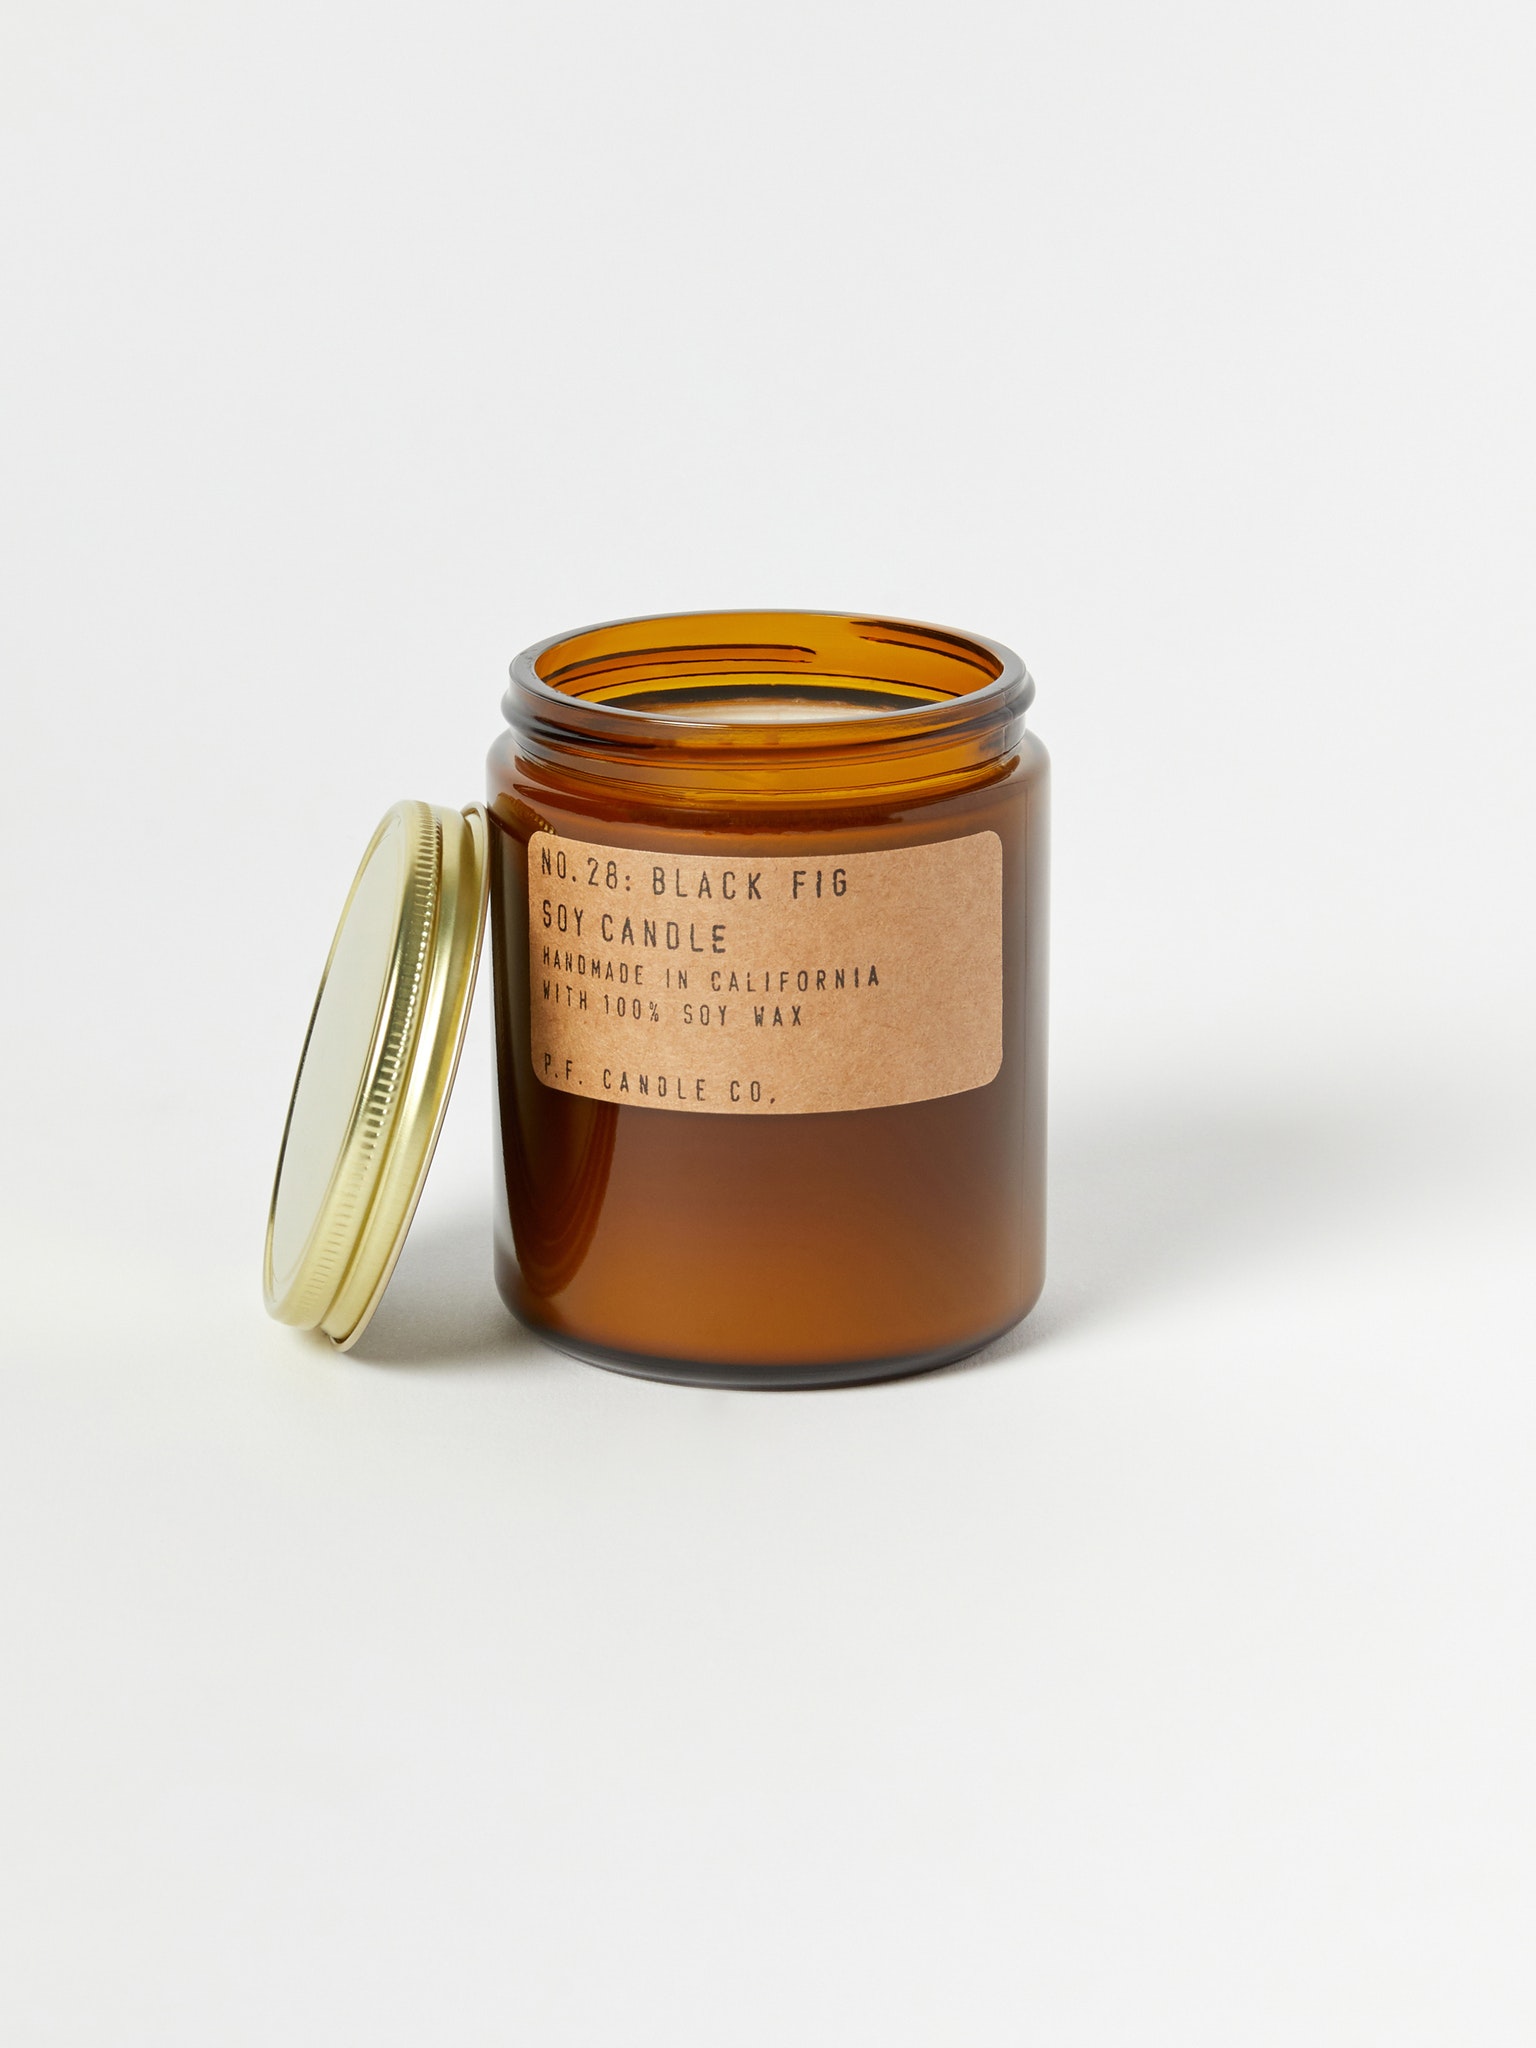 P.F. Candle Co. Black Fig Candle